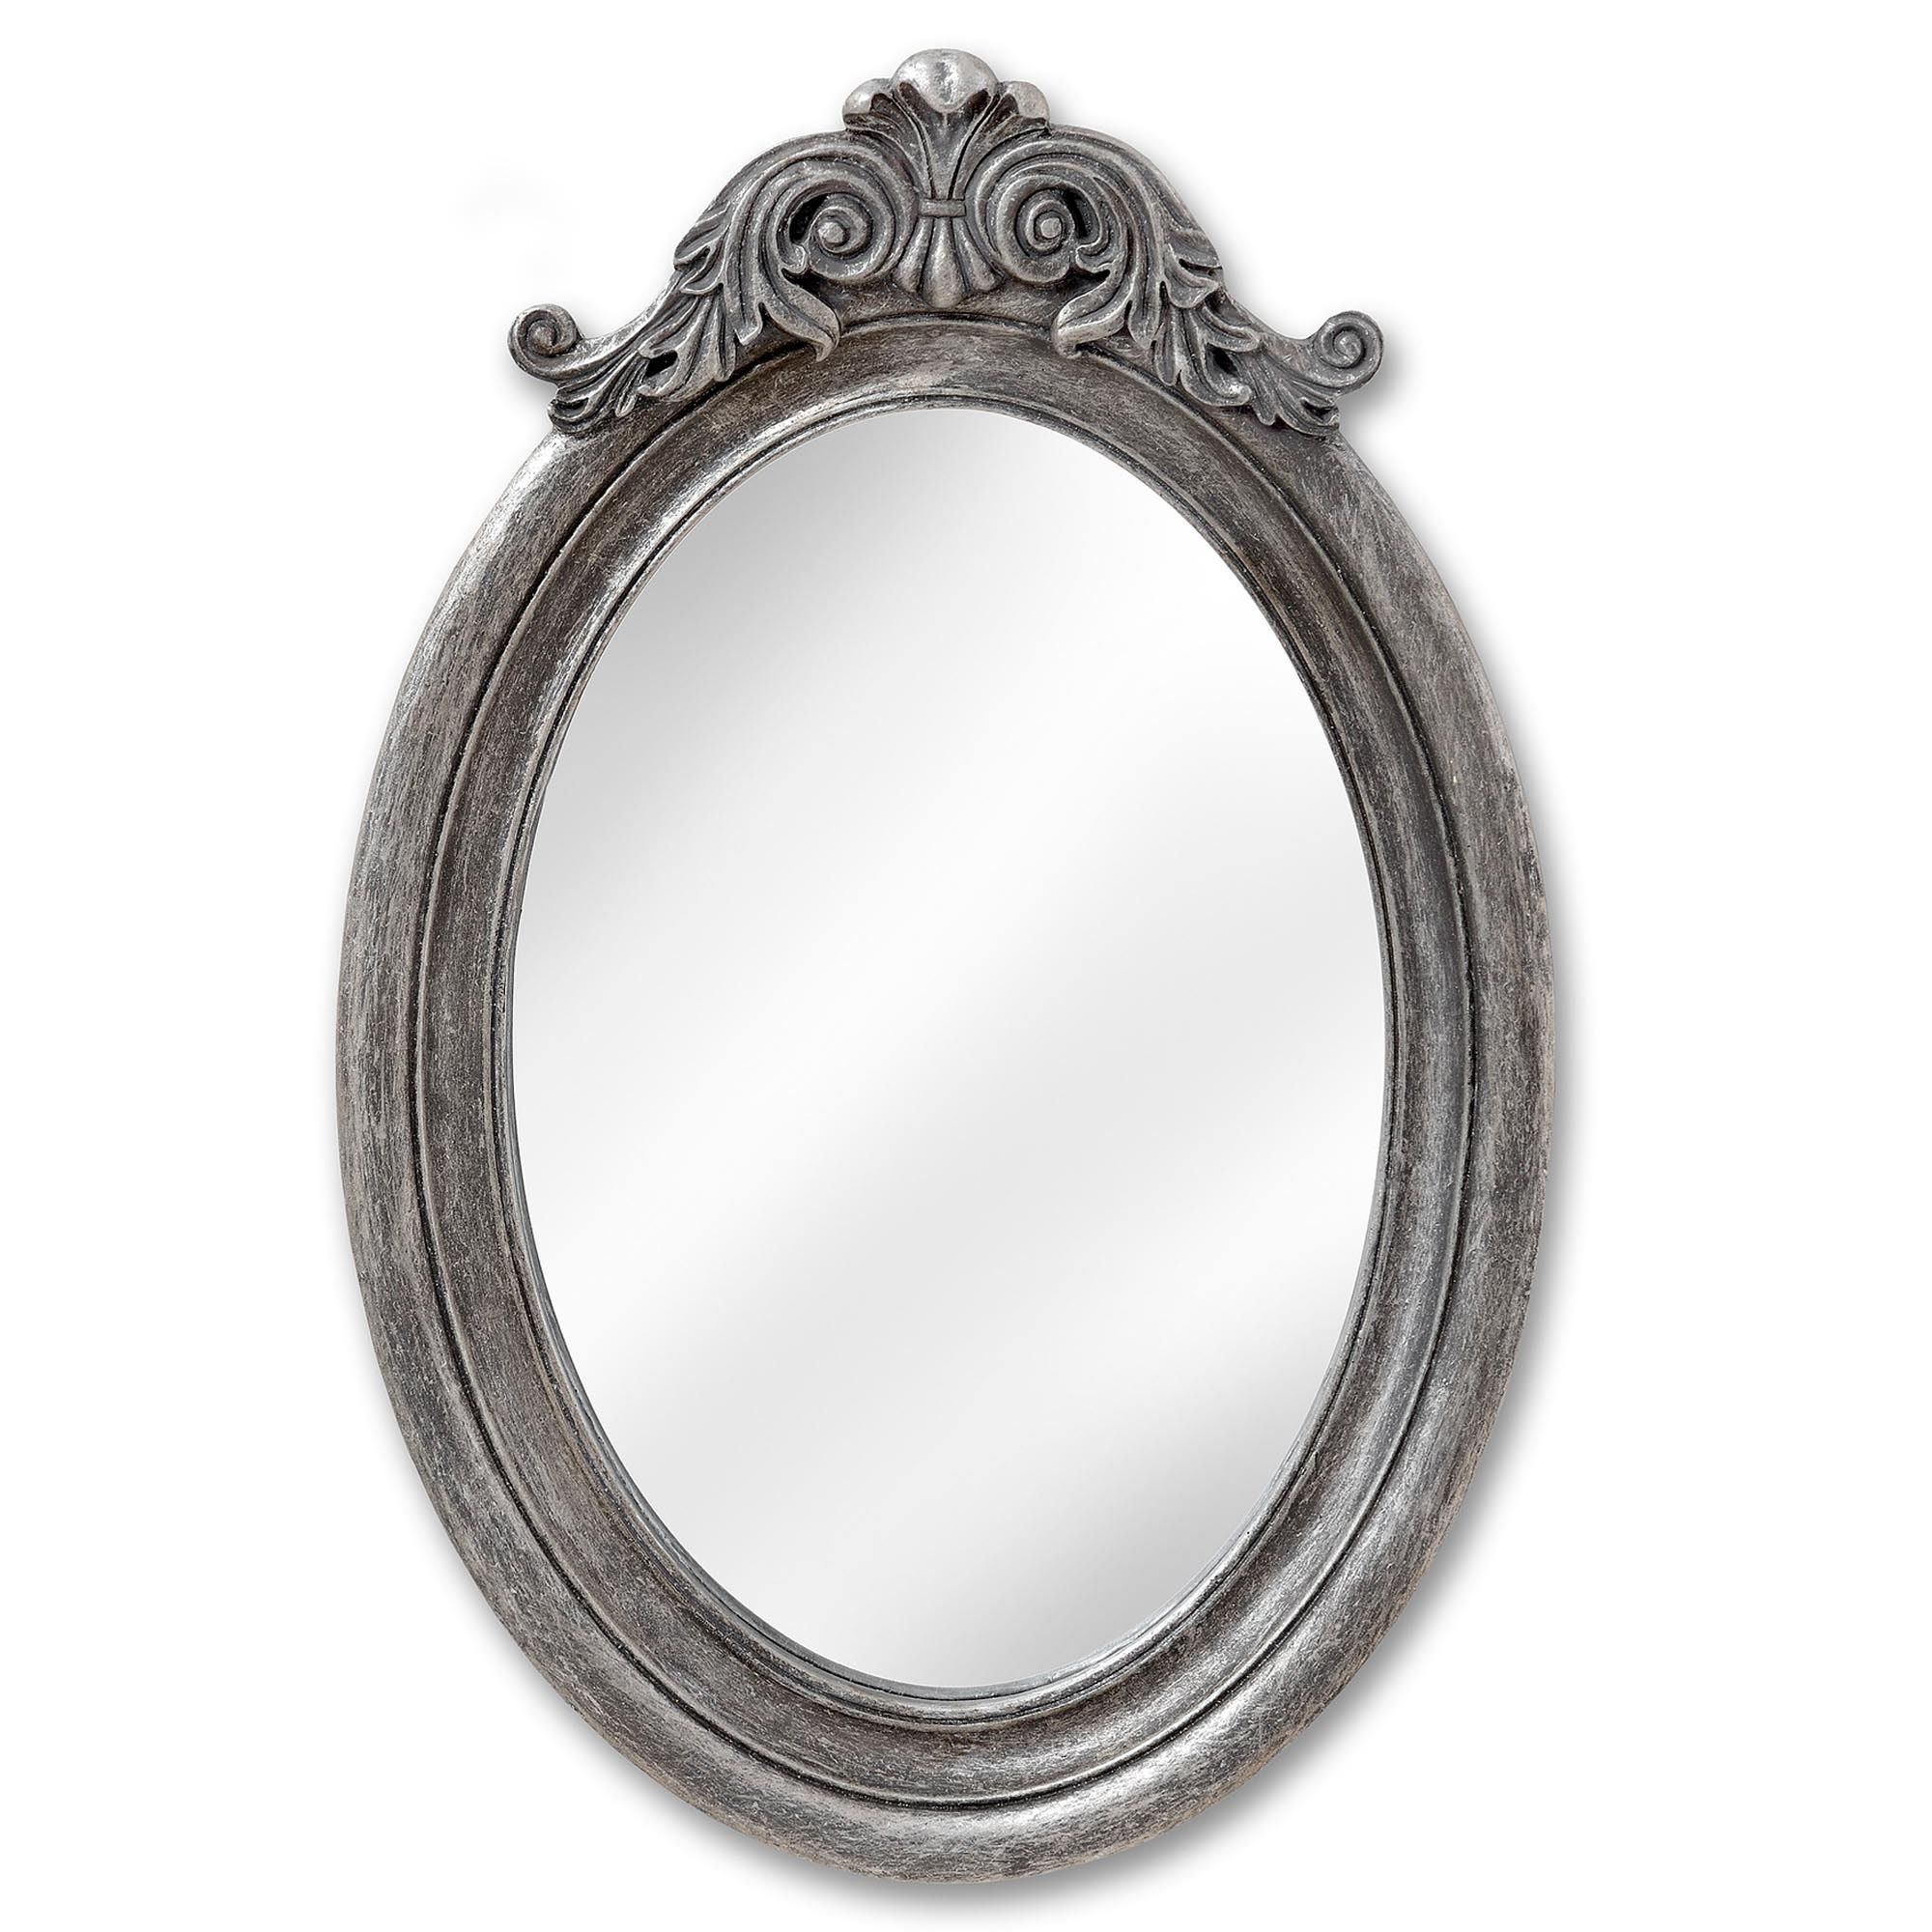 Antique French Style Silver Oval Wall Mirror | Homesdirect365 With Regard To Silver Oval Wall Mirrors (View 10 of 15)